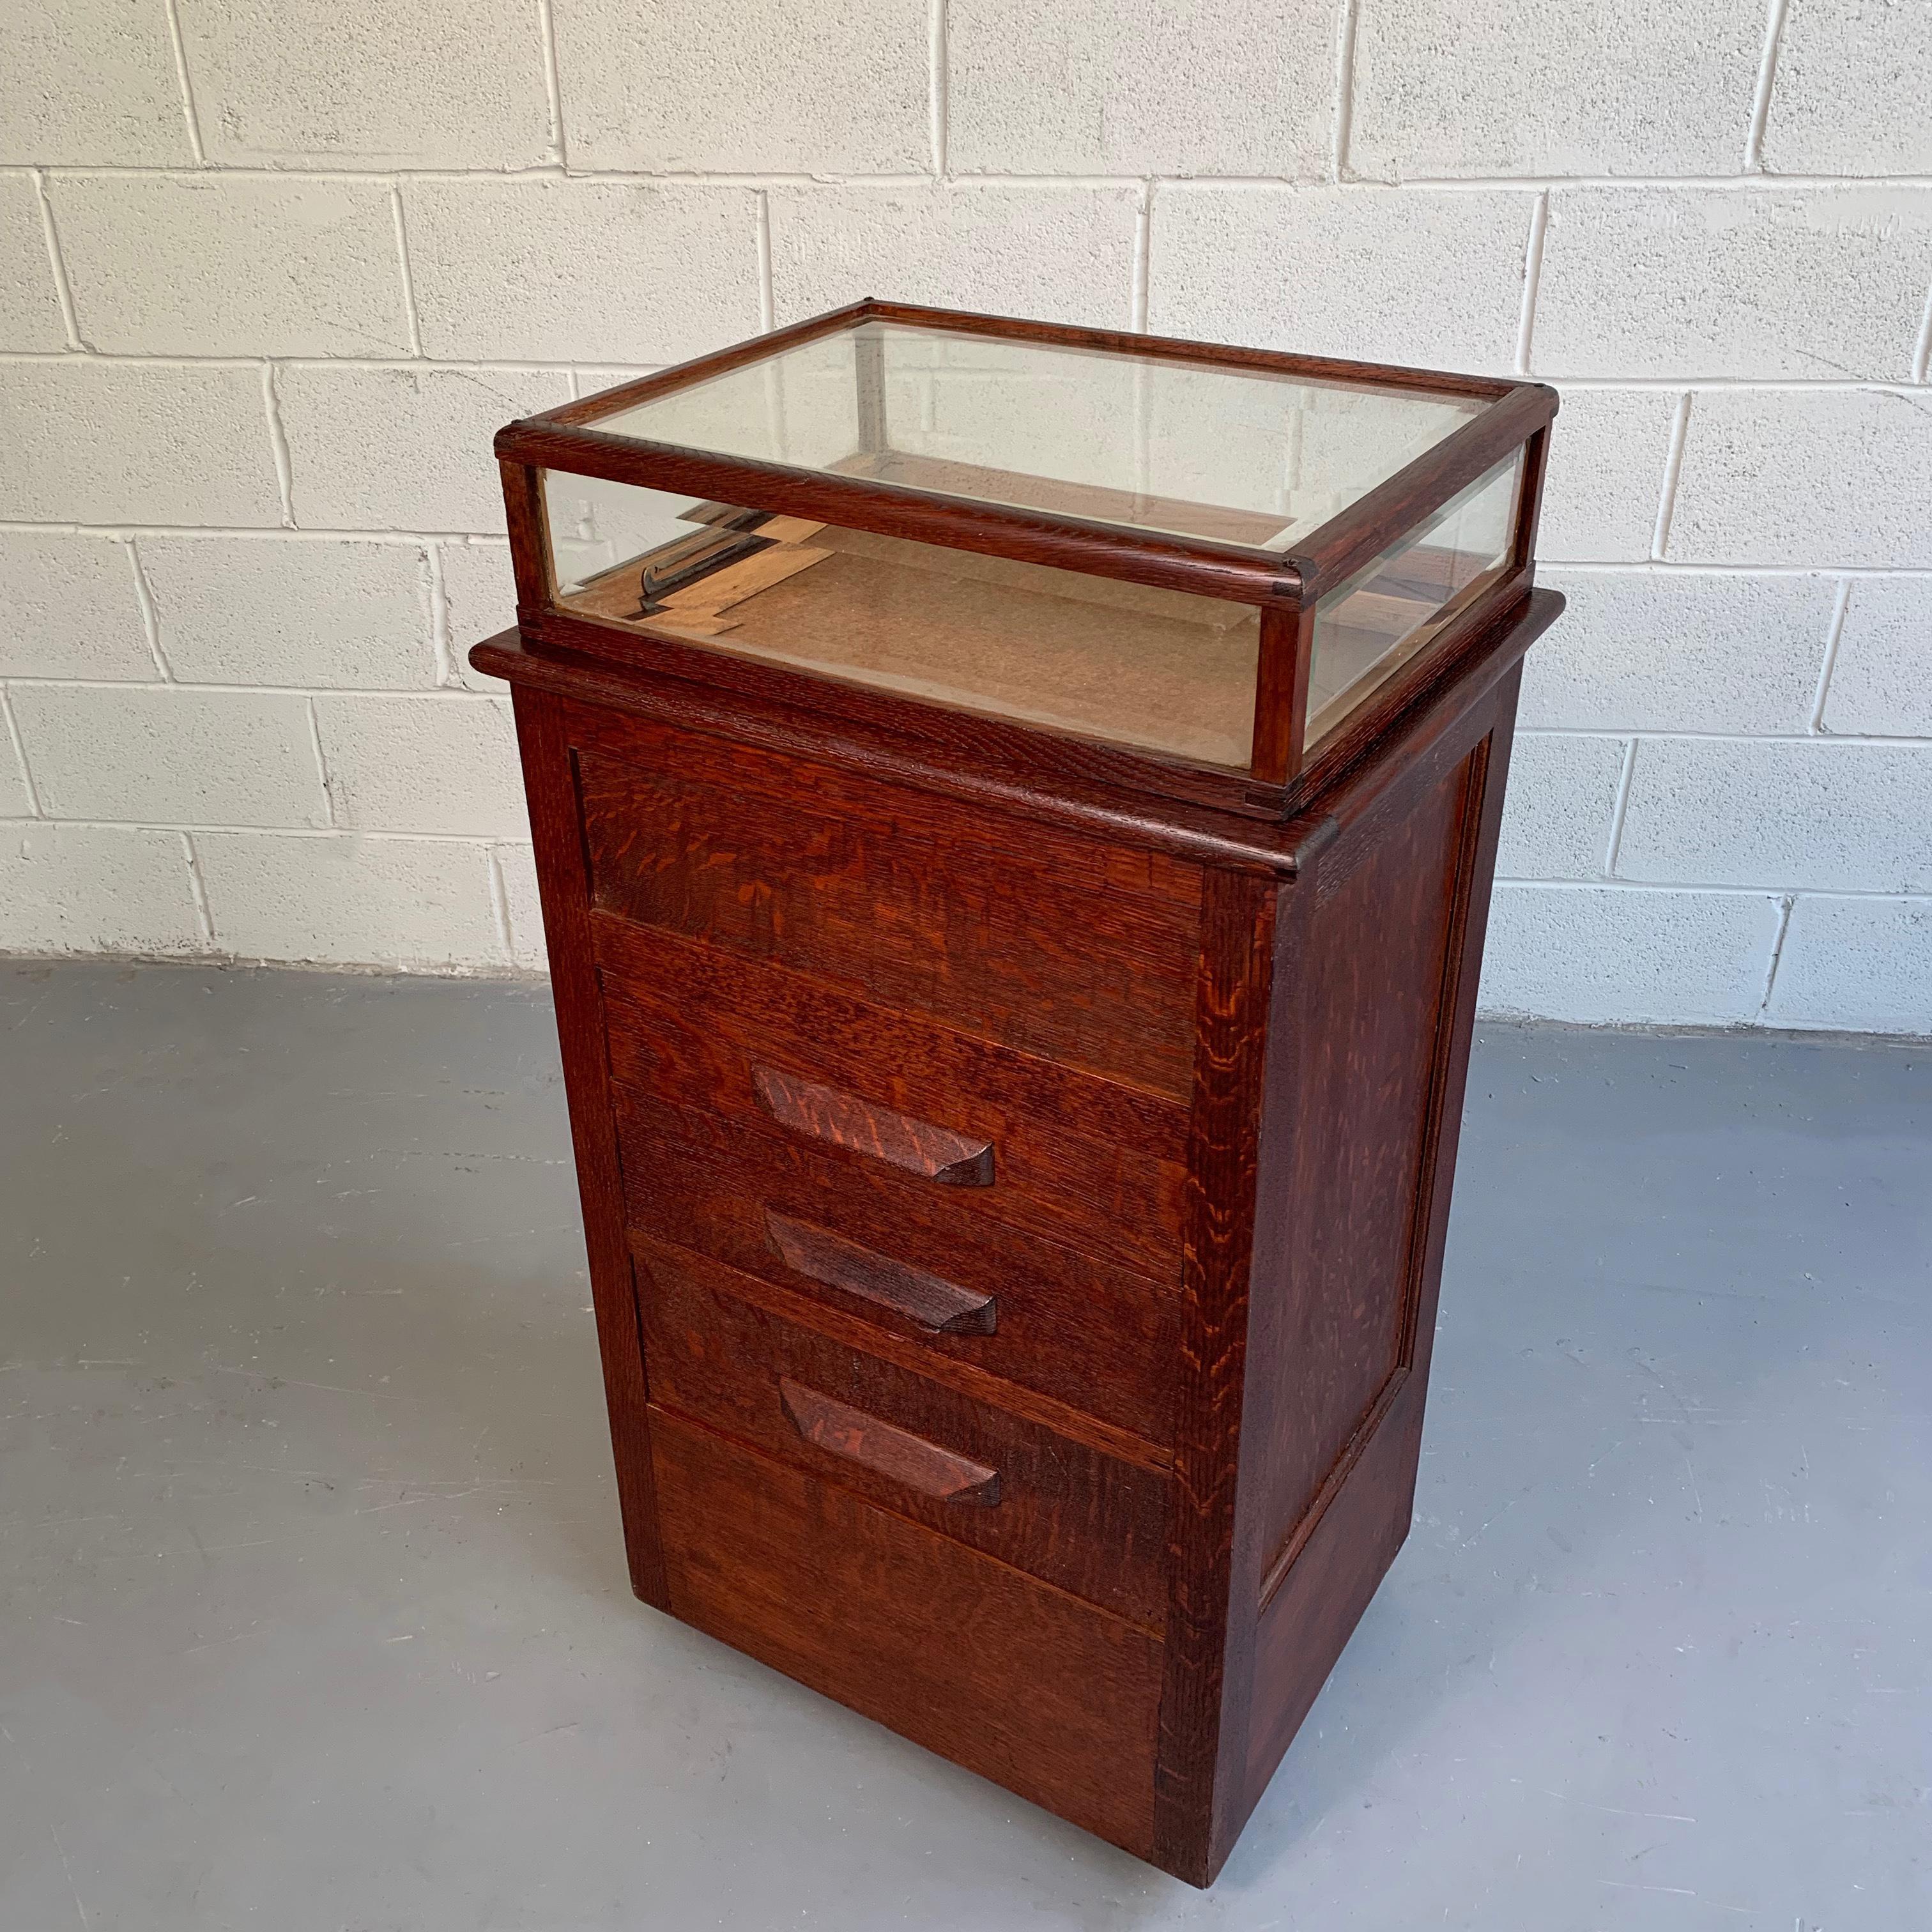 Early 20th century, watch or jewelry display case features a quarter sawn oak, 3 drawer cabinet on the bottom and a beveled glass vitrine on top. The bottom drawers are 6, 4.5 and 4 inches in height. Finished on all sides.